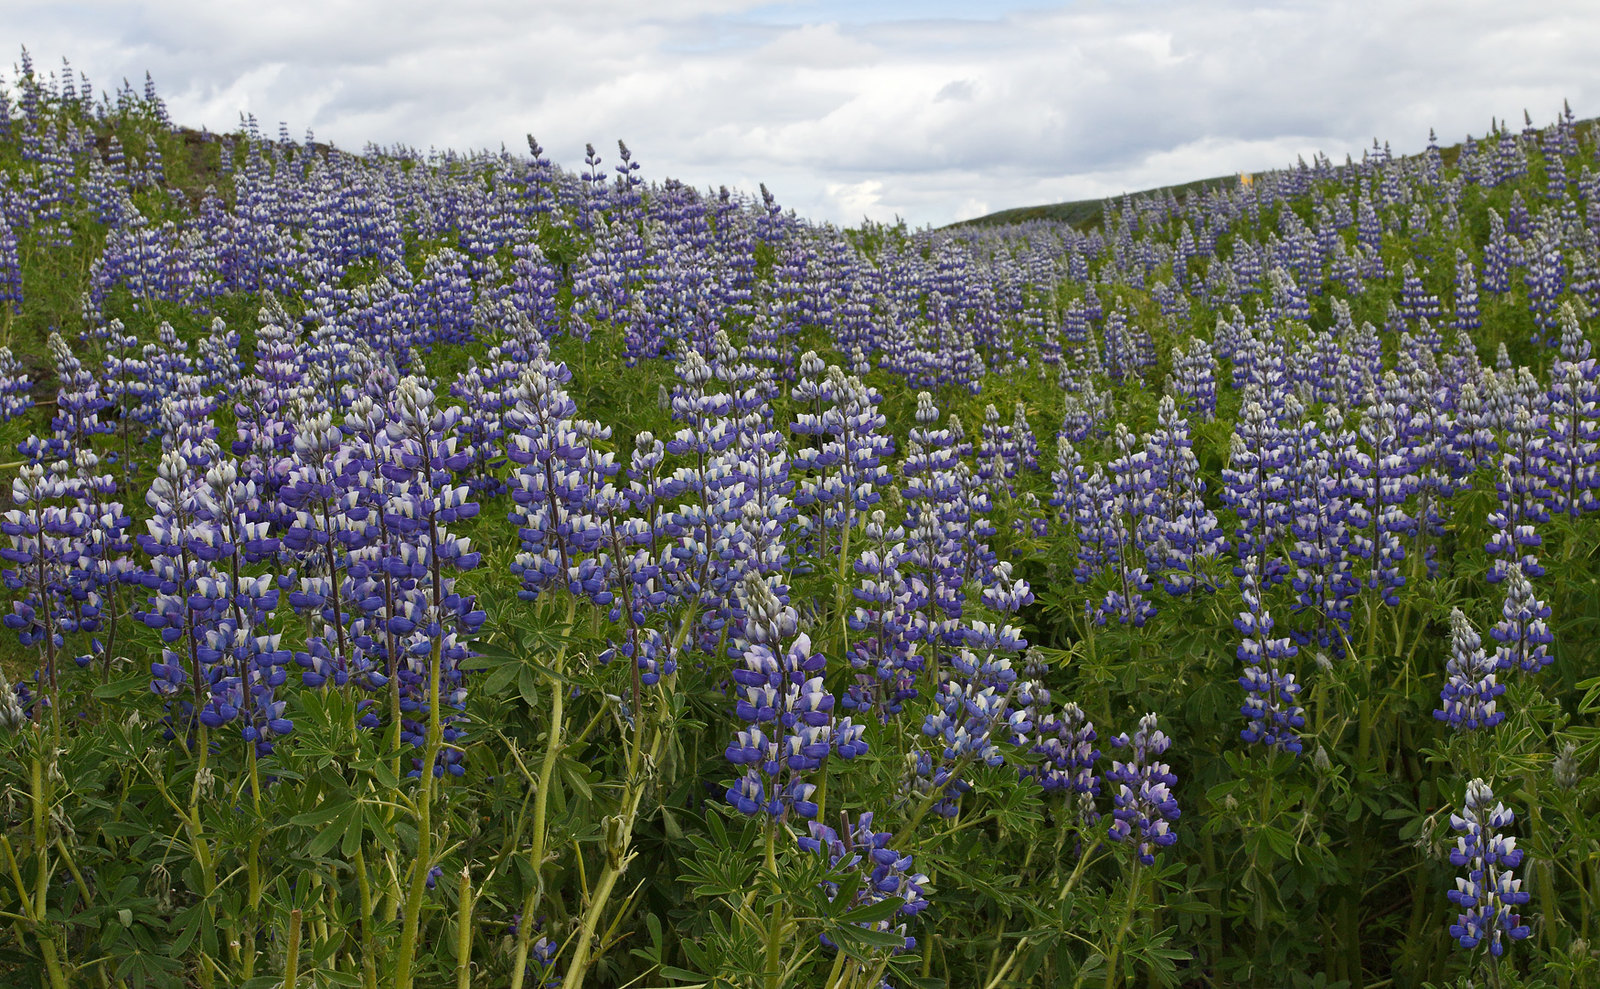 Lupins are everywhere!